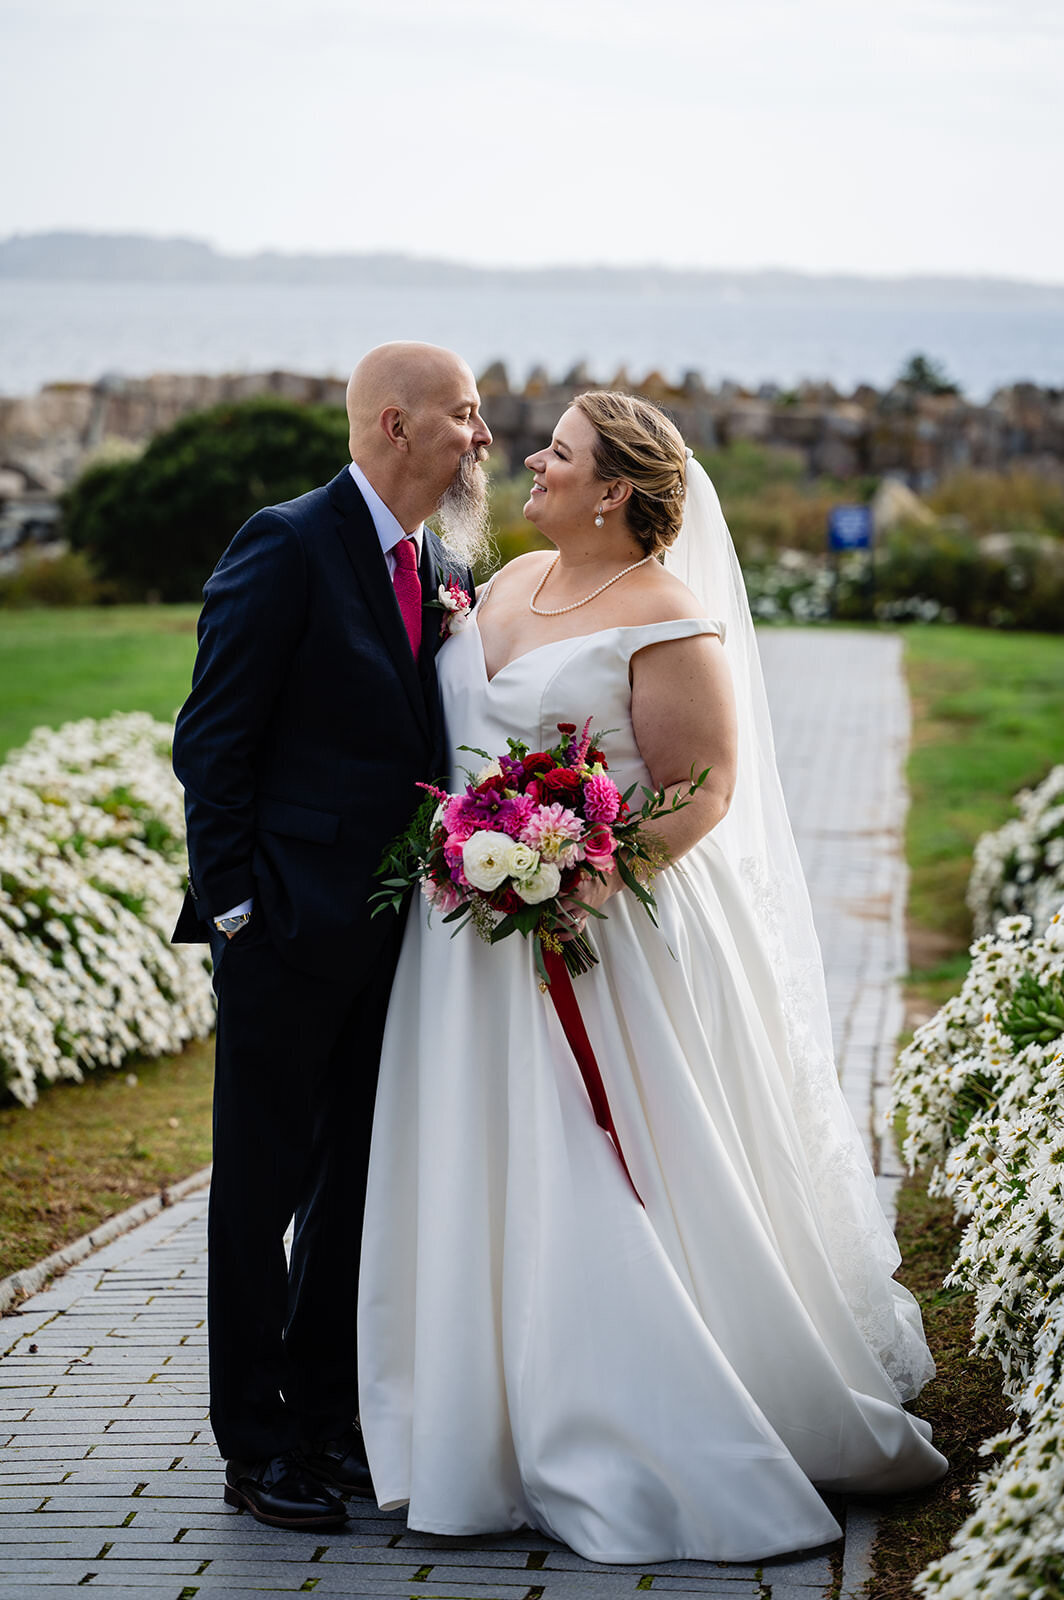 A bride and groom gaze into each other's eyes, standing amidst white flowers with a coastal backdrop